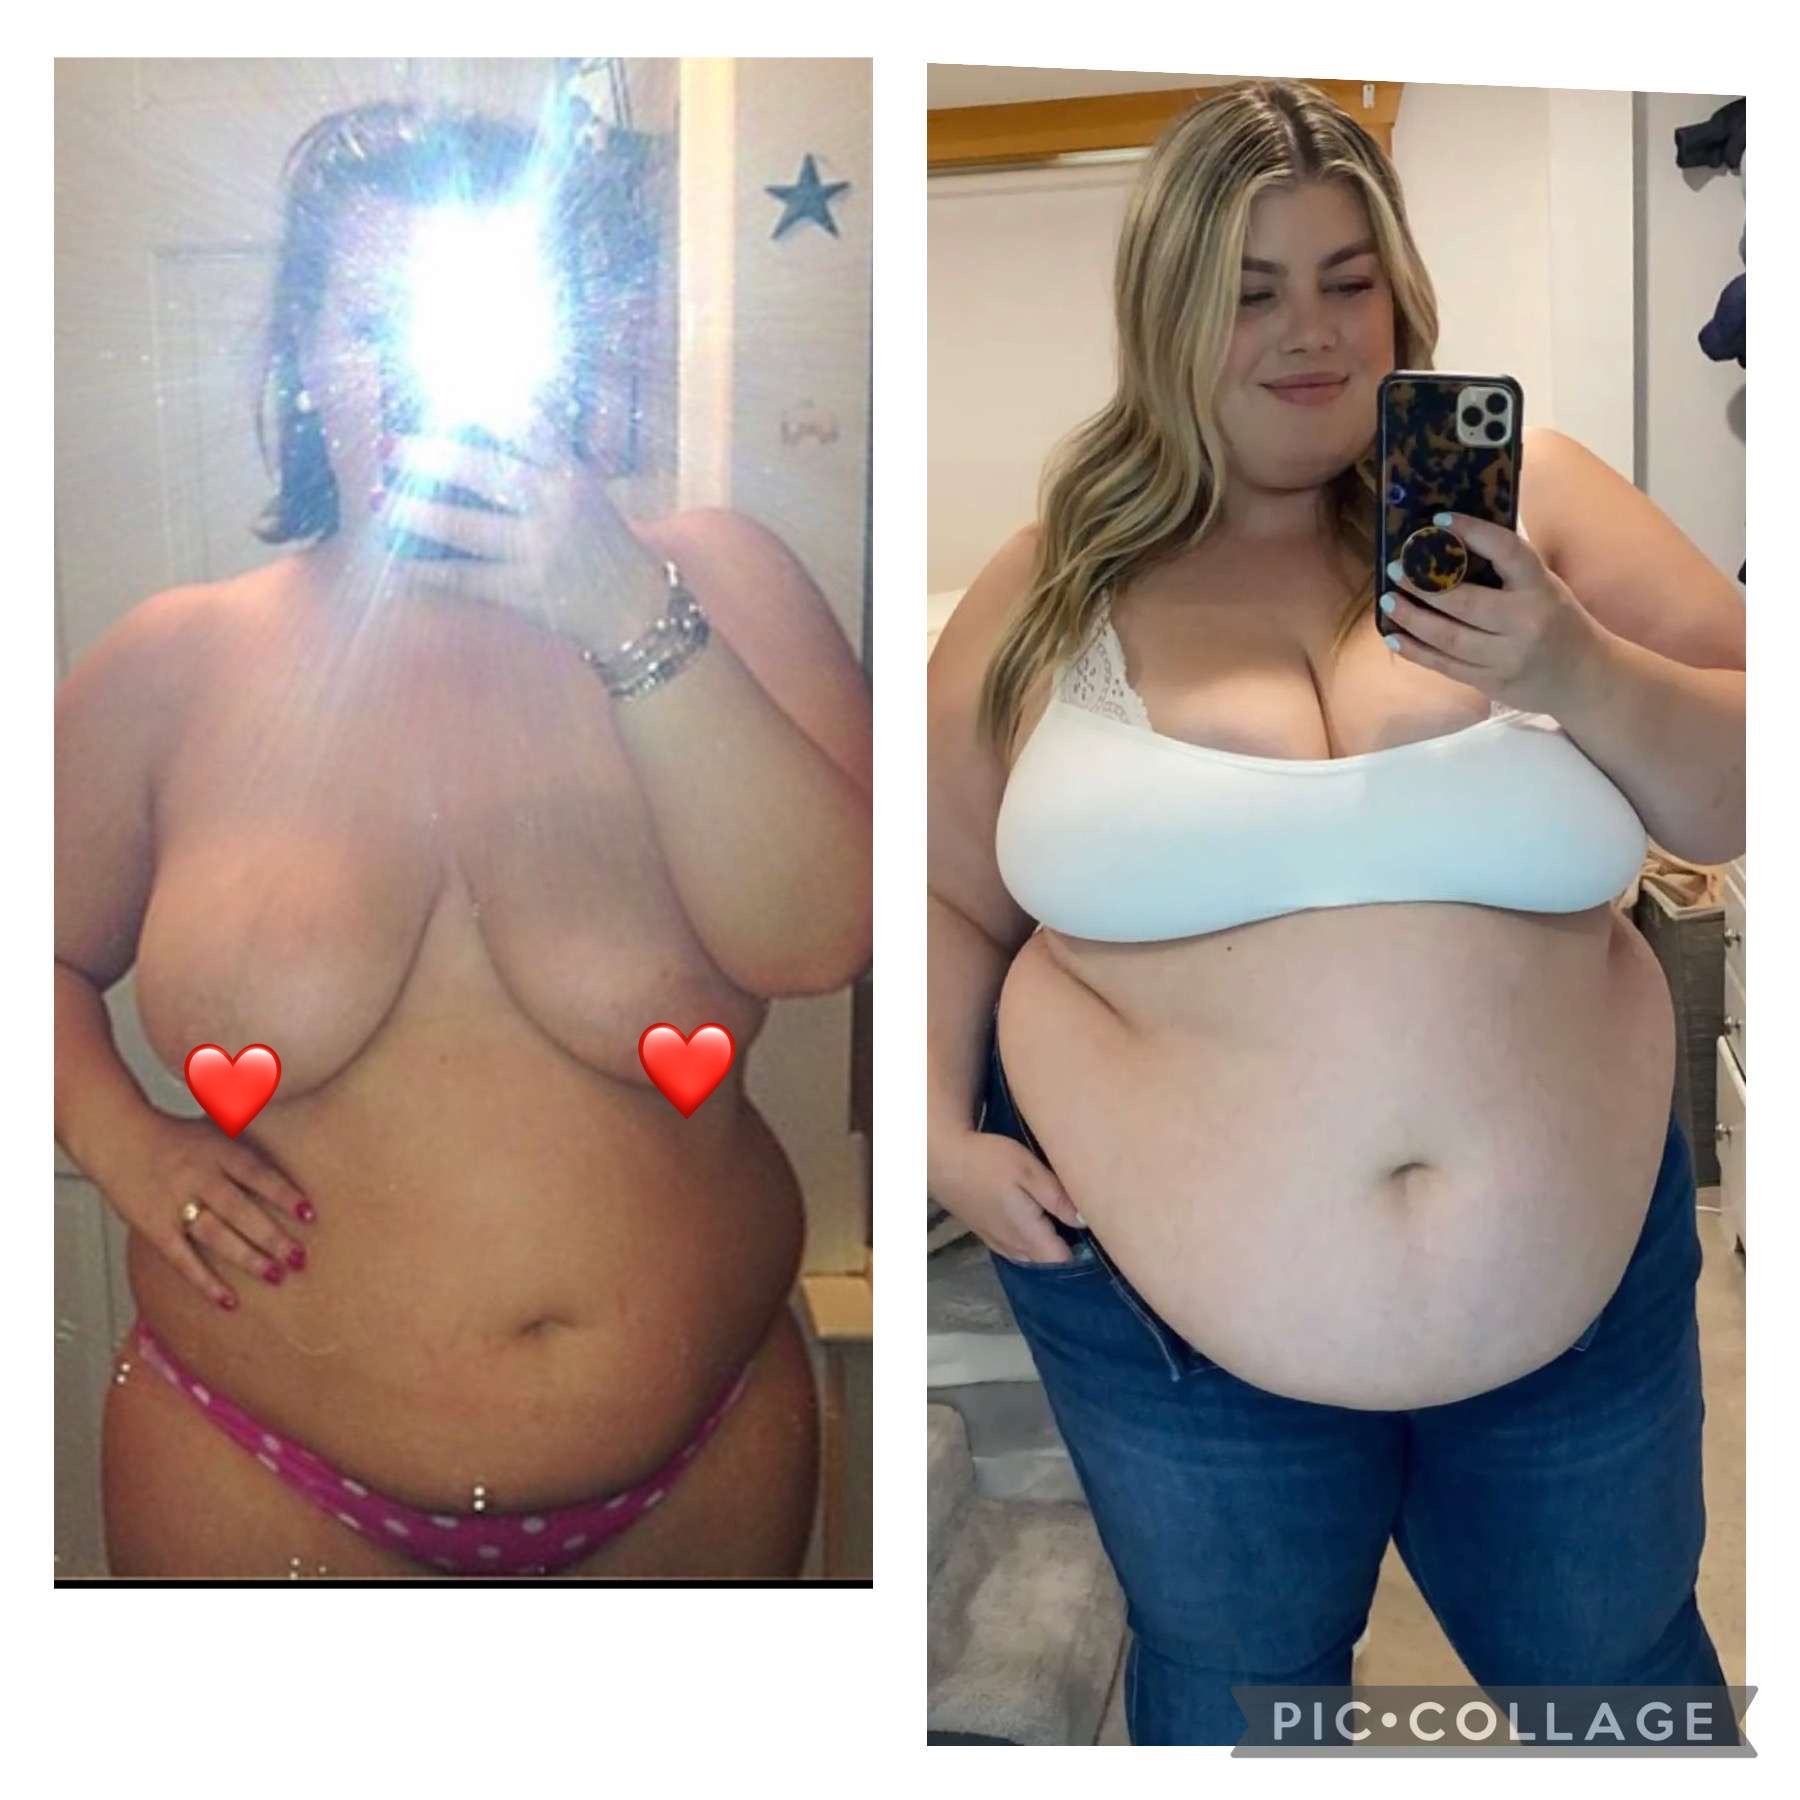 Sex ssbbw-chloe:I love these comparisons 🥰 pictures